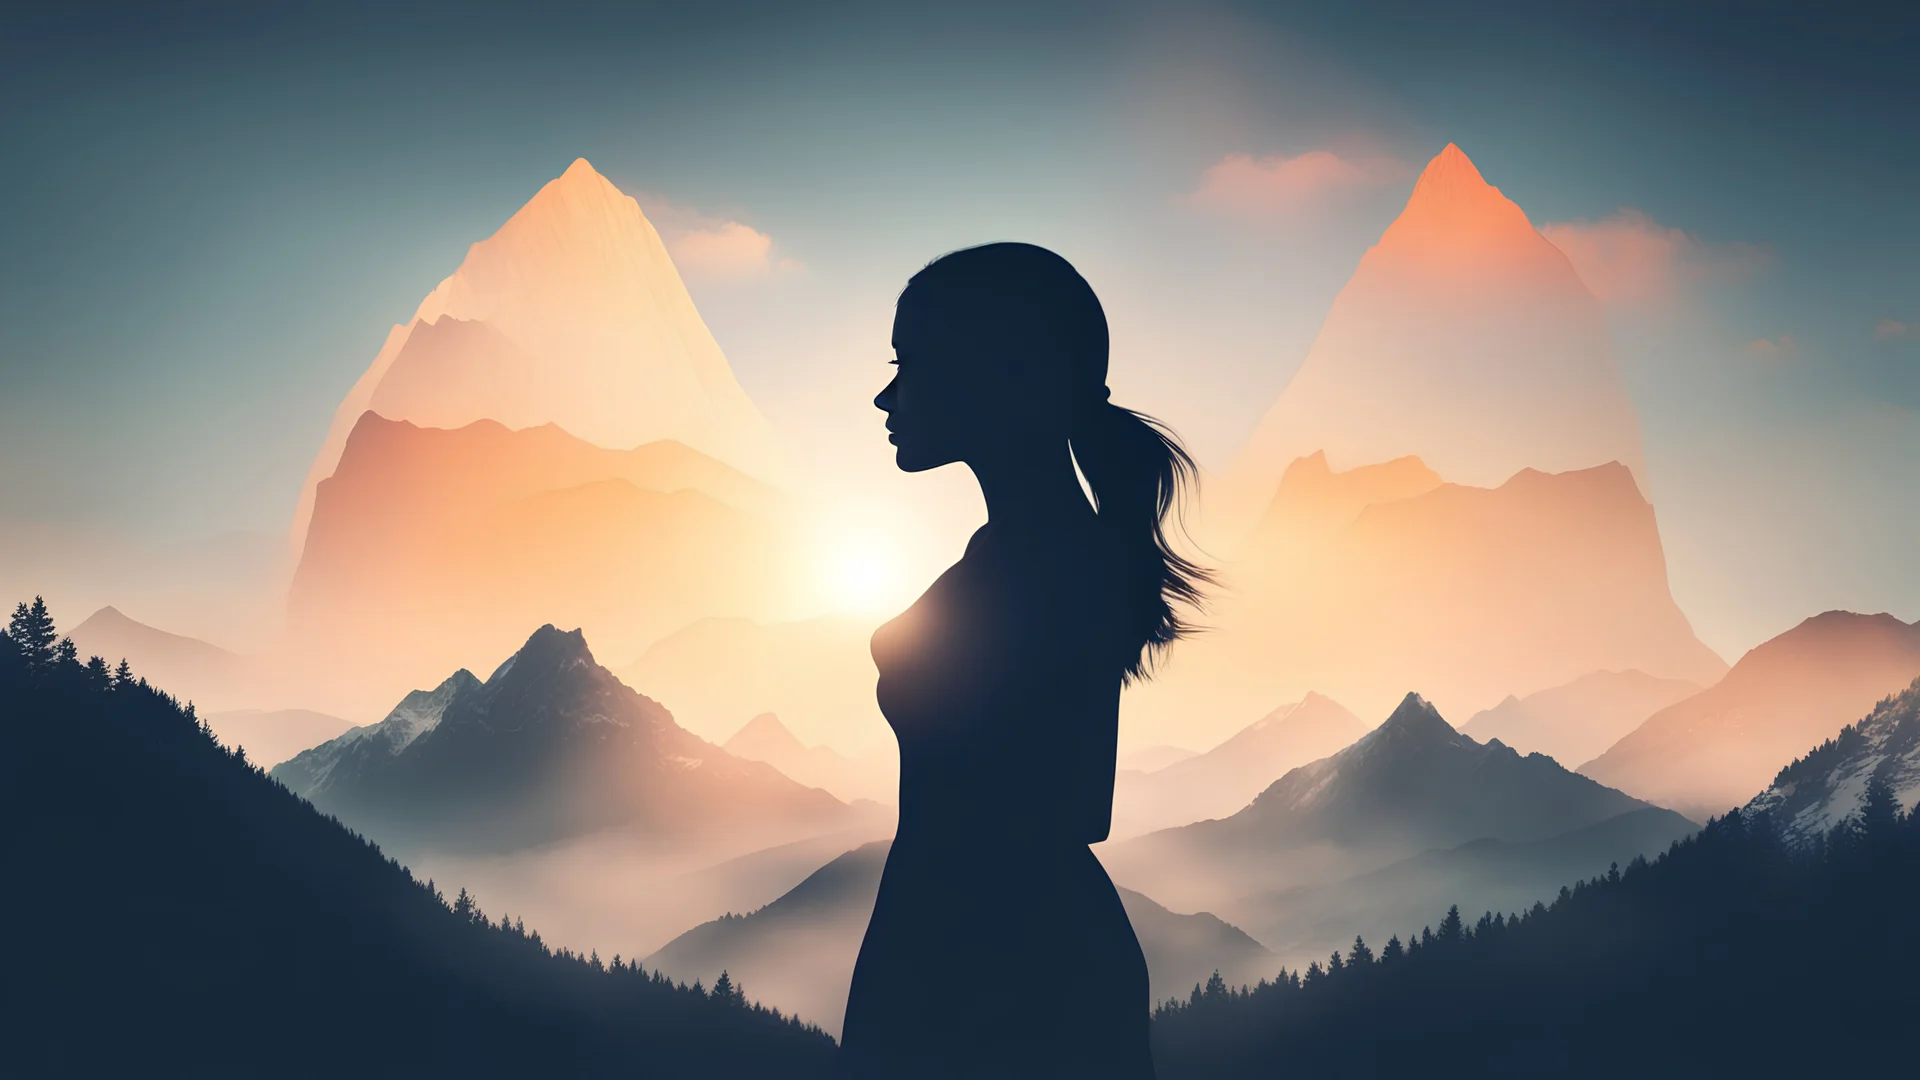 high quality, 8K Ultra HD, A beautiful double exposure that combines an girl silhouette with sunrise mountain, sunrise mountain should serve as the underlying backdrop, with its details incorporated into the girl , crisp lines,